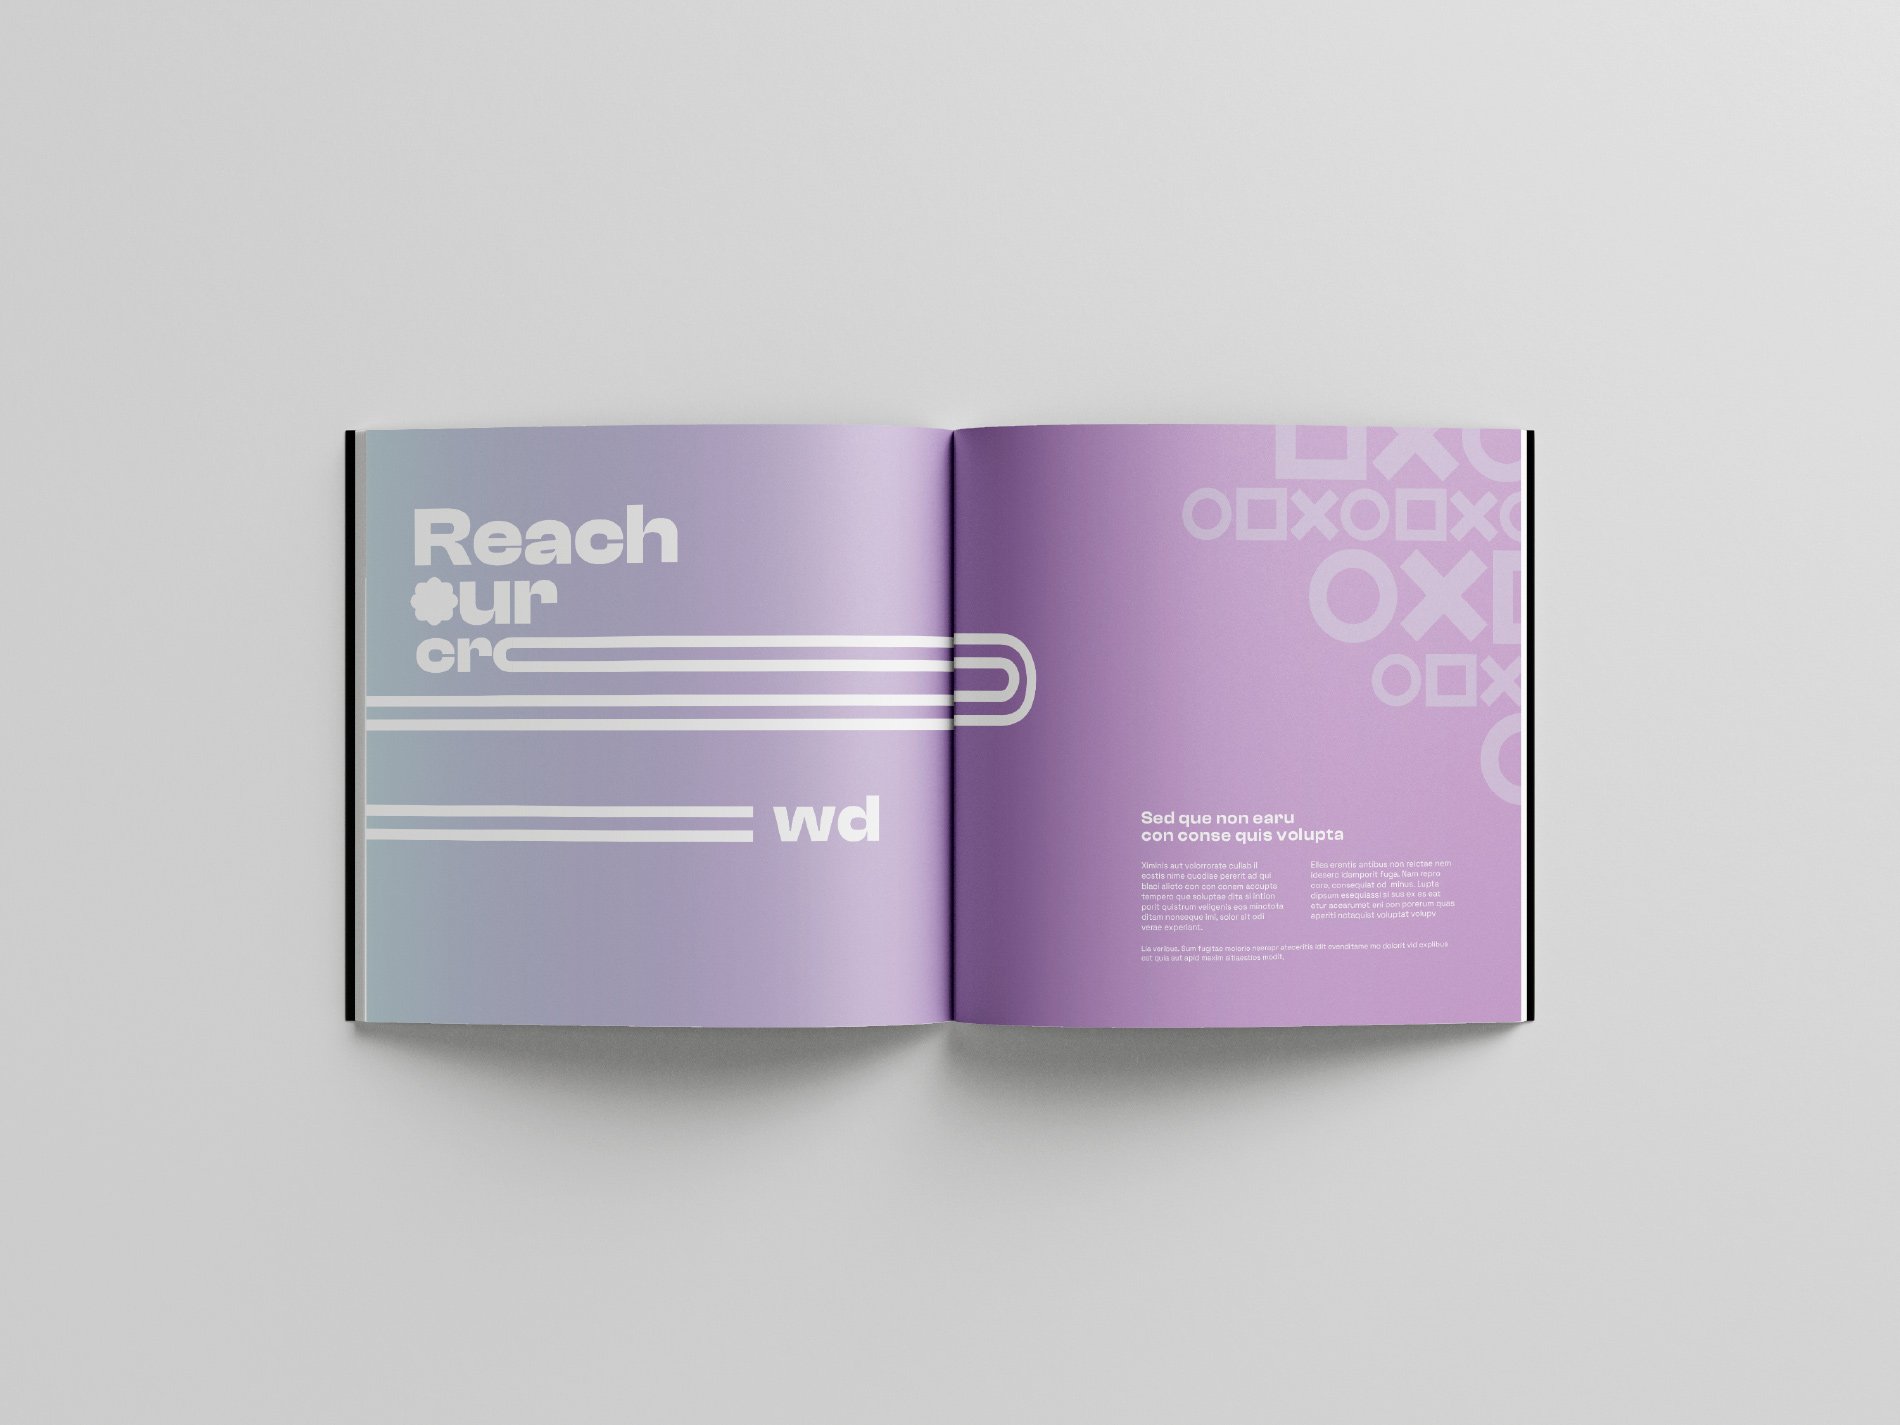 sol-yoon--twitch--annual-report--community-report--communication-design--information-design--advertising--design-in-business-and-marketing--capilano-university-idea-school-of-design-5.jpg